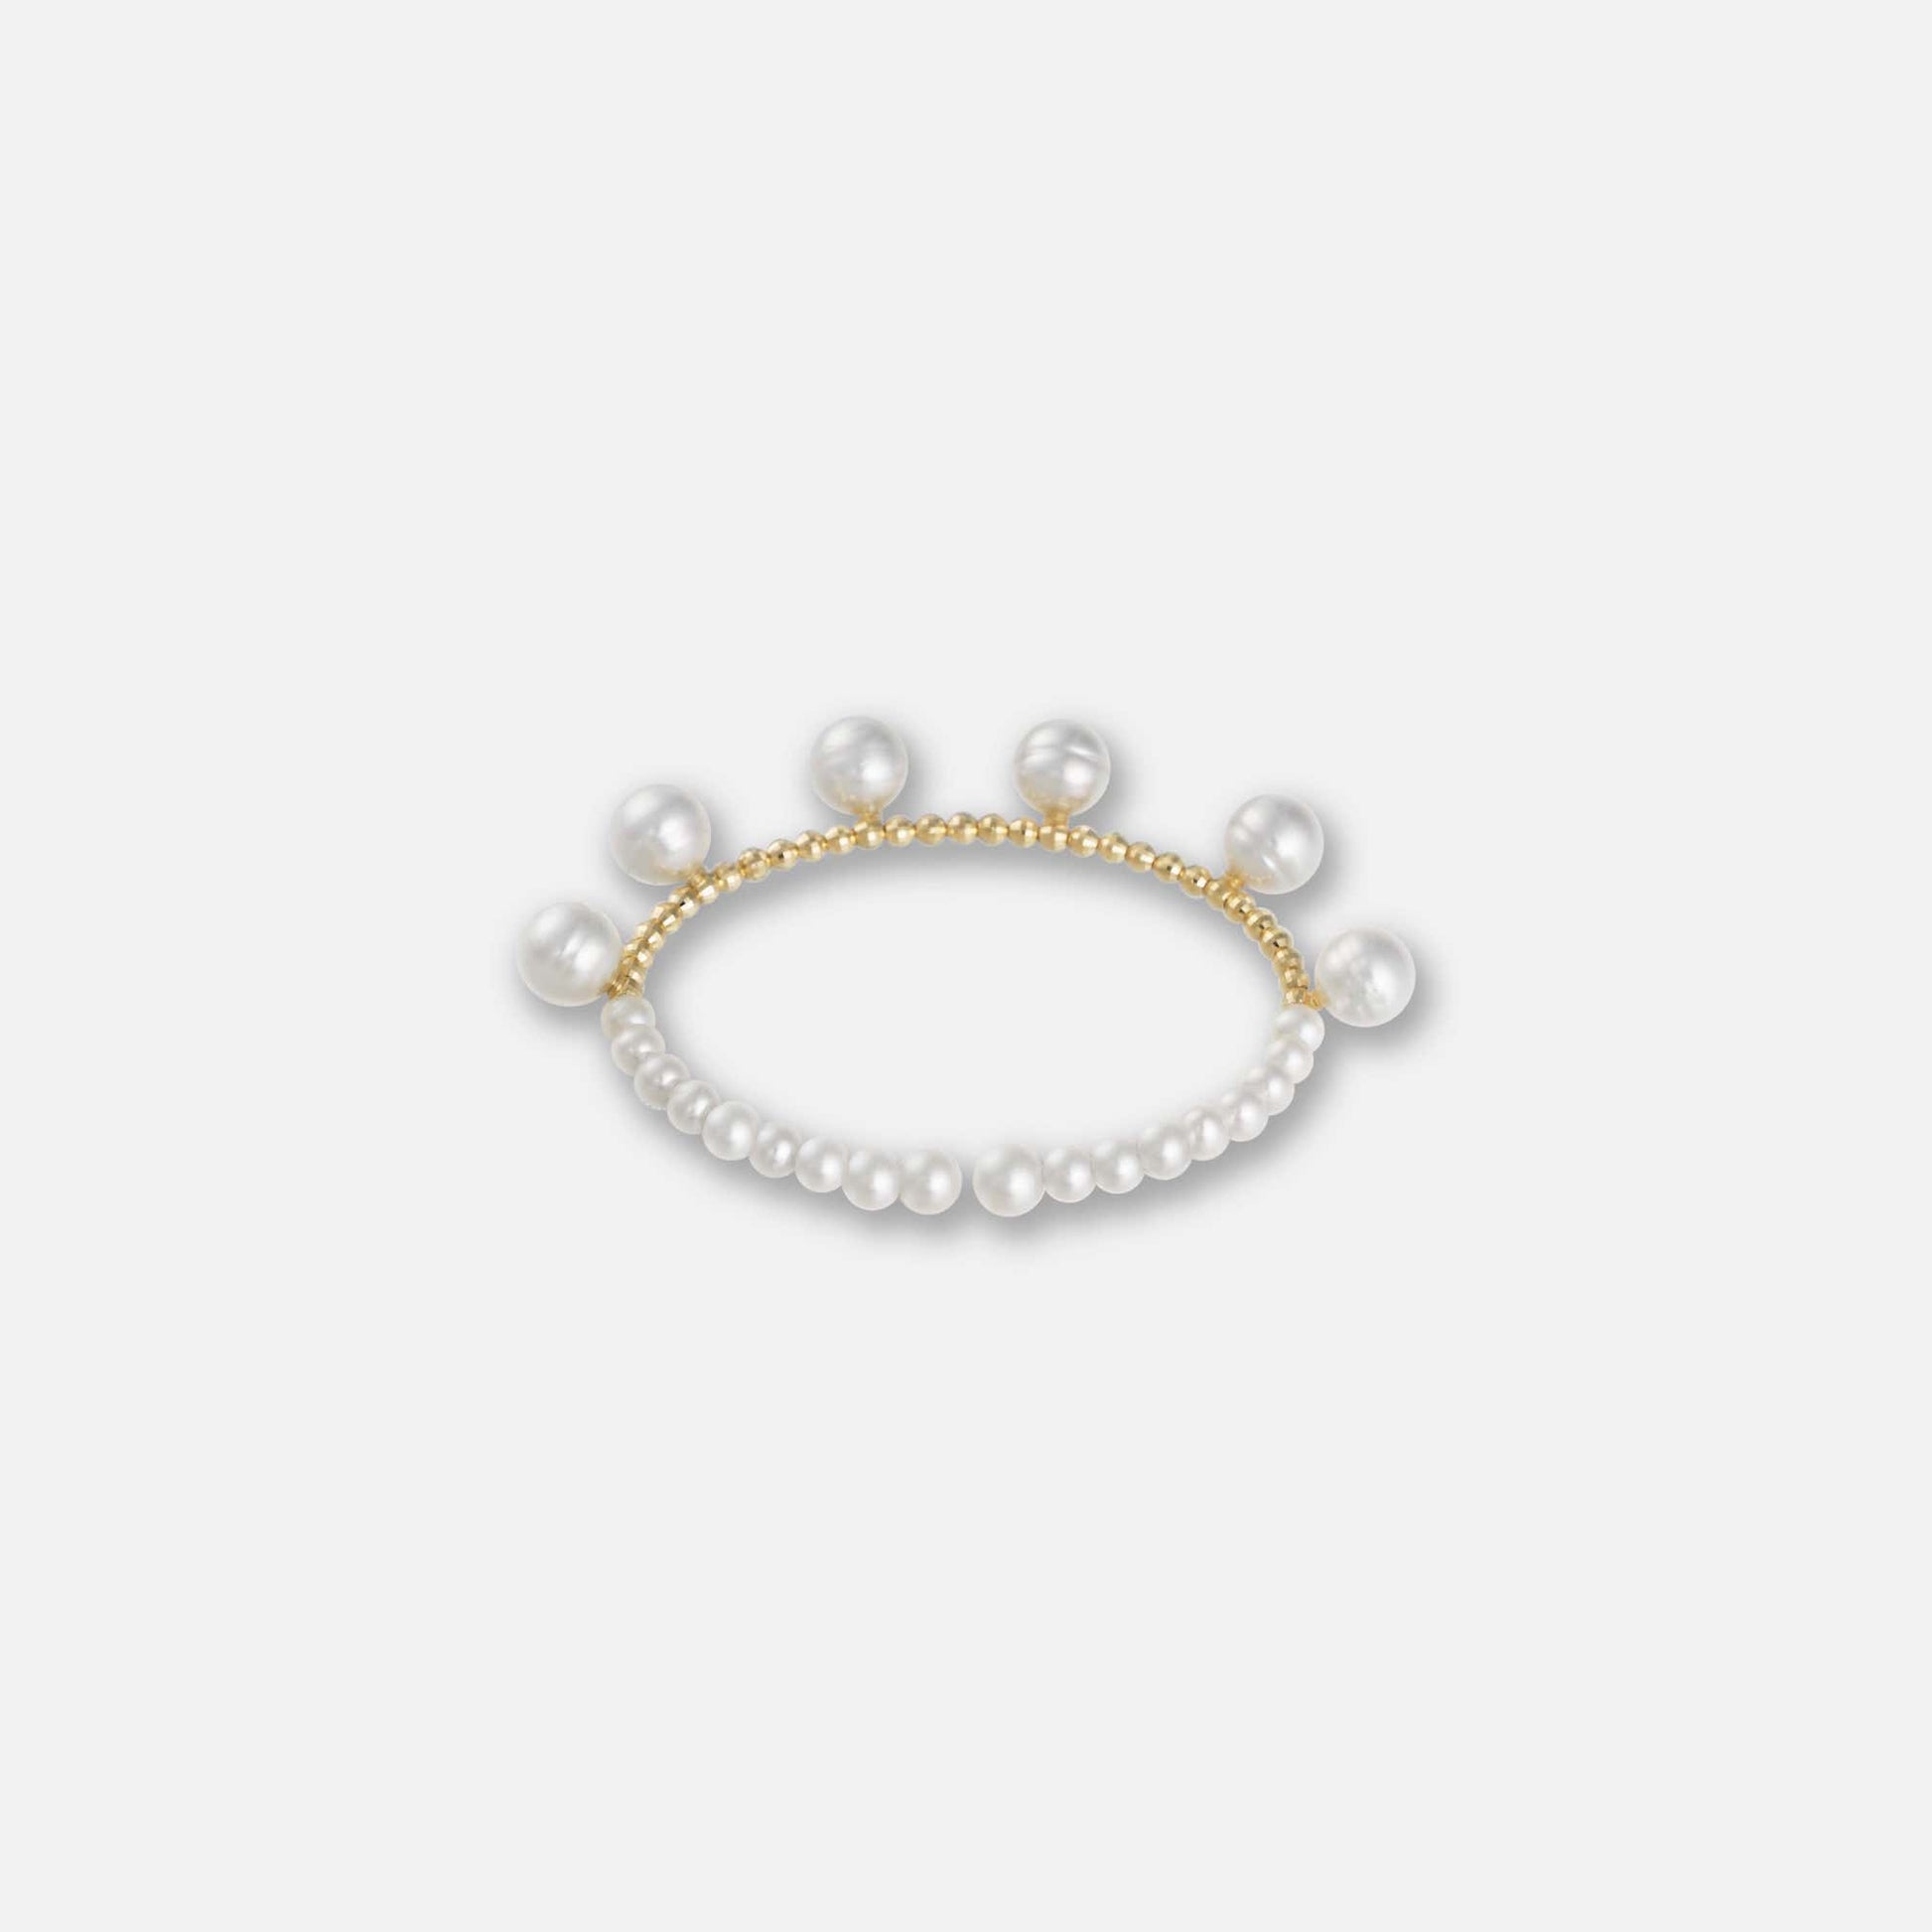 Stunning pearl bracelet featuring gold beads against a white backdrop. A timeless piece that exudes luxury and style.